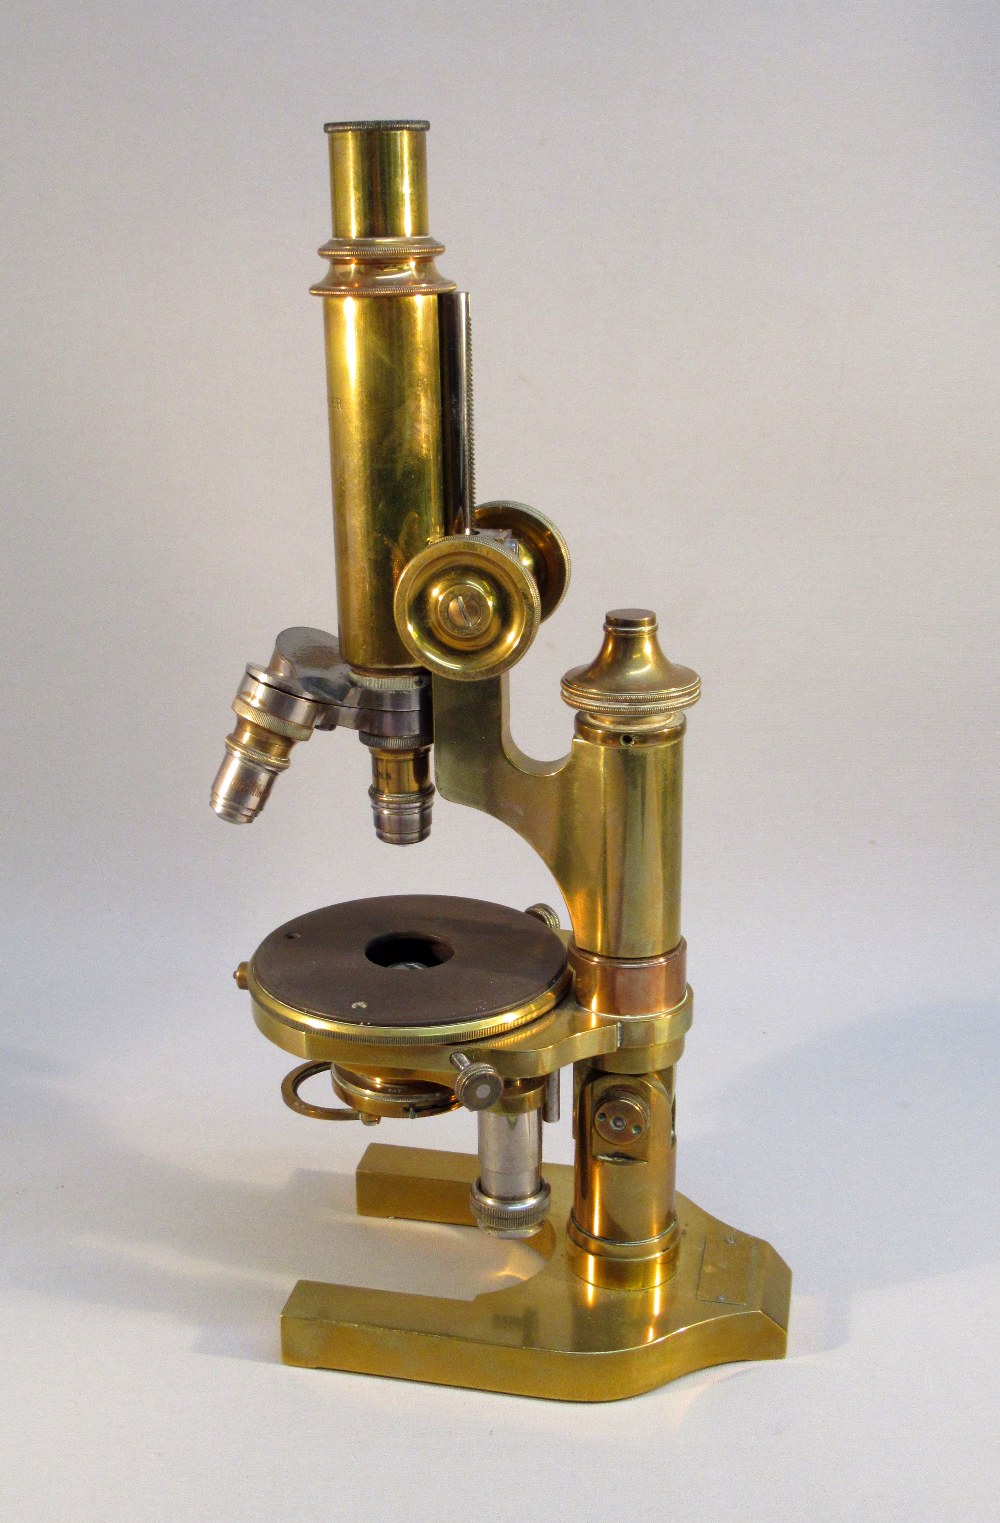 A LATE C19th BRASS MICROSCOPE BY OTTO HIMMLER. BERLIN N.14160 LACQUERED BRASS, HORSE SHOE FOOT, - Image 8 of 10